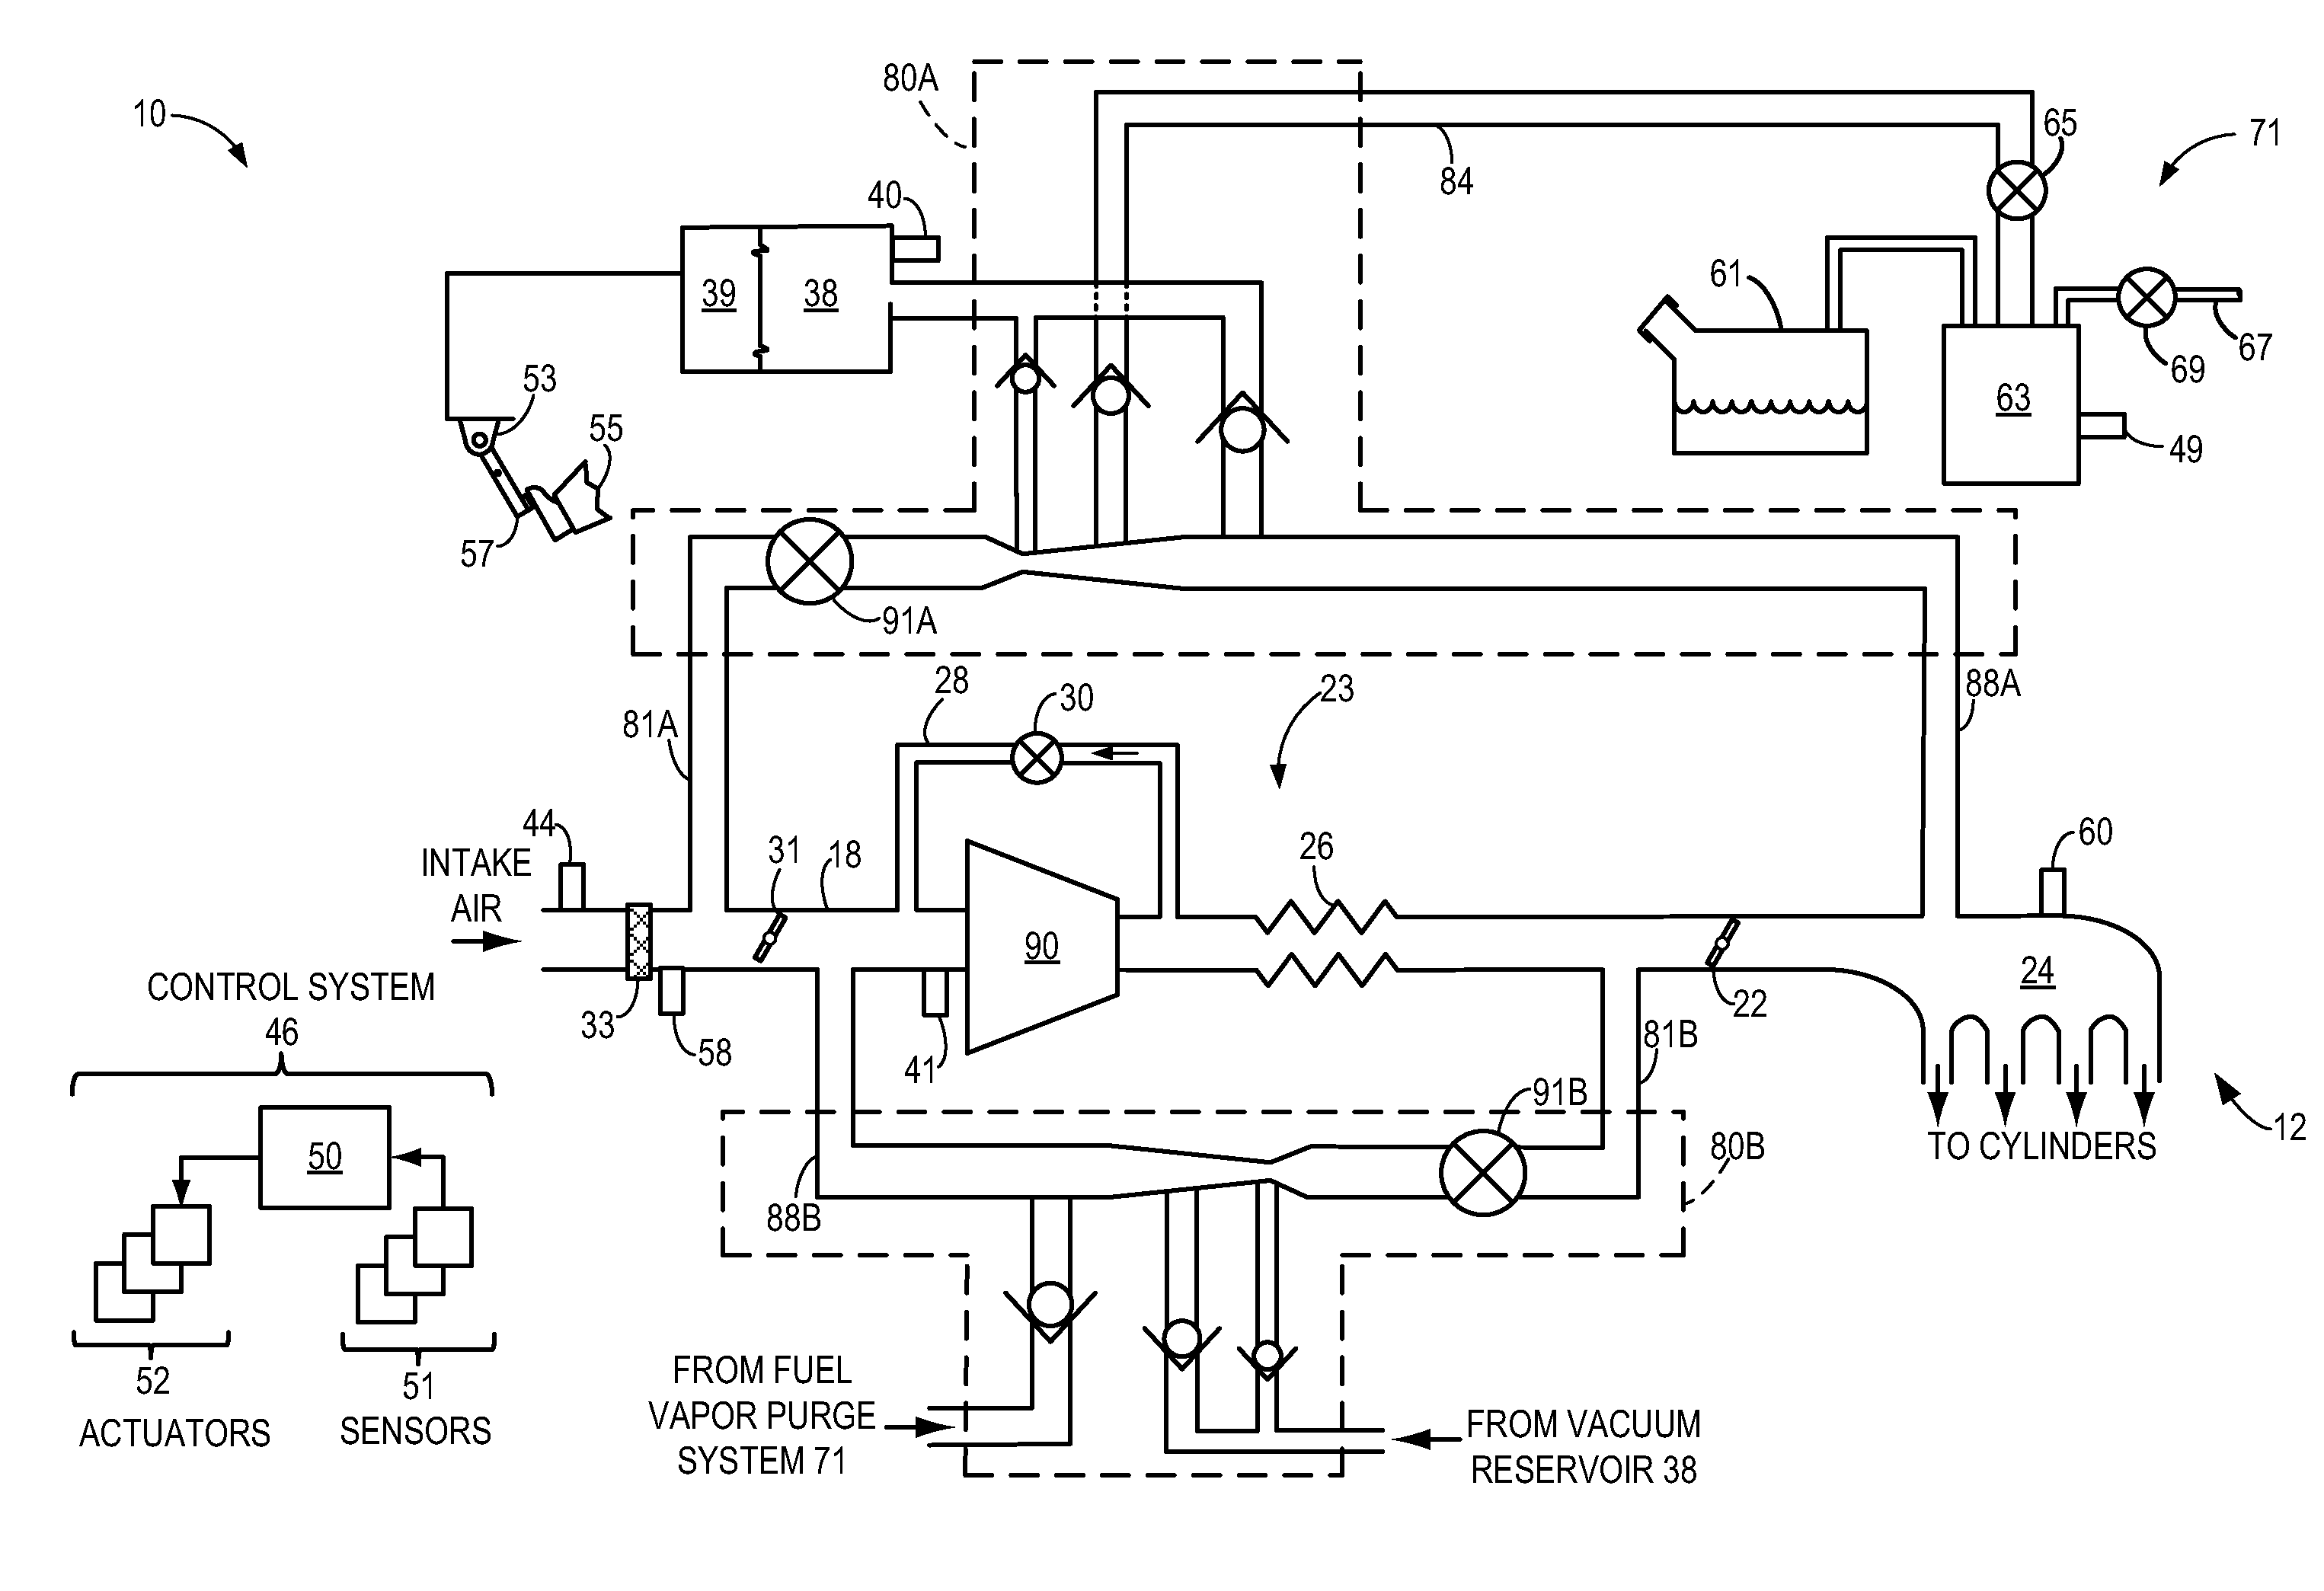 Aspirator motive flow control for vacuum generation and compressor bypass